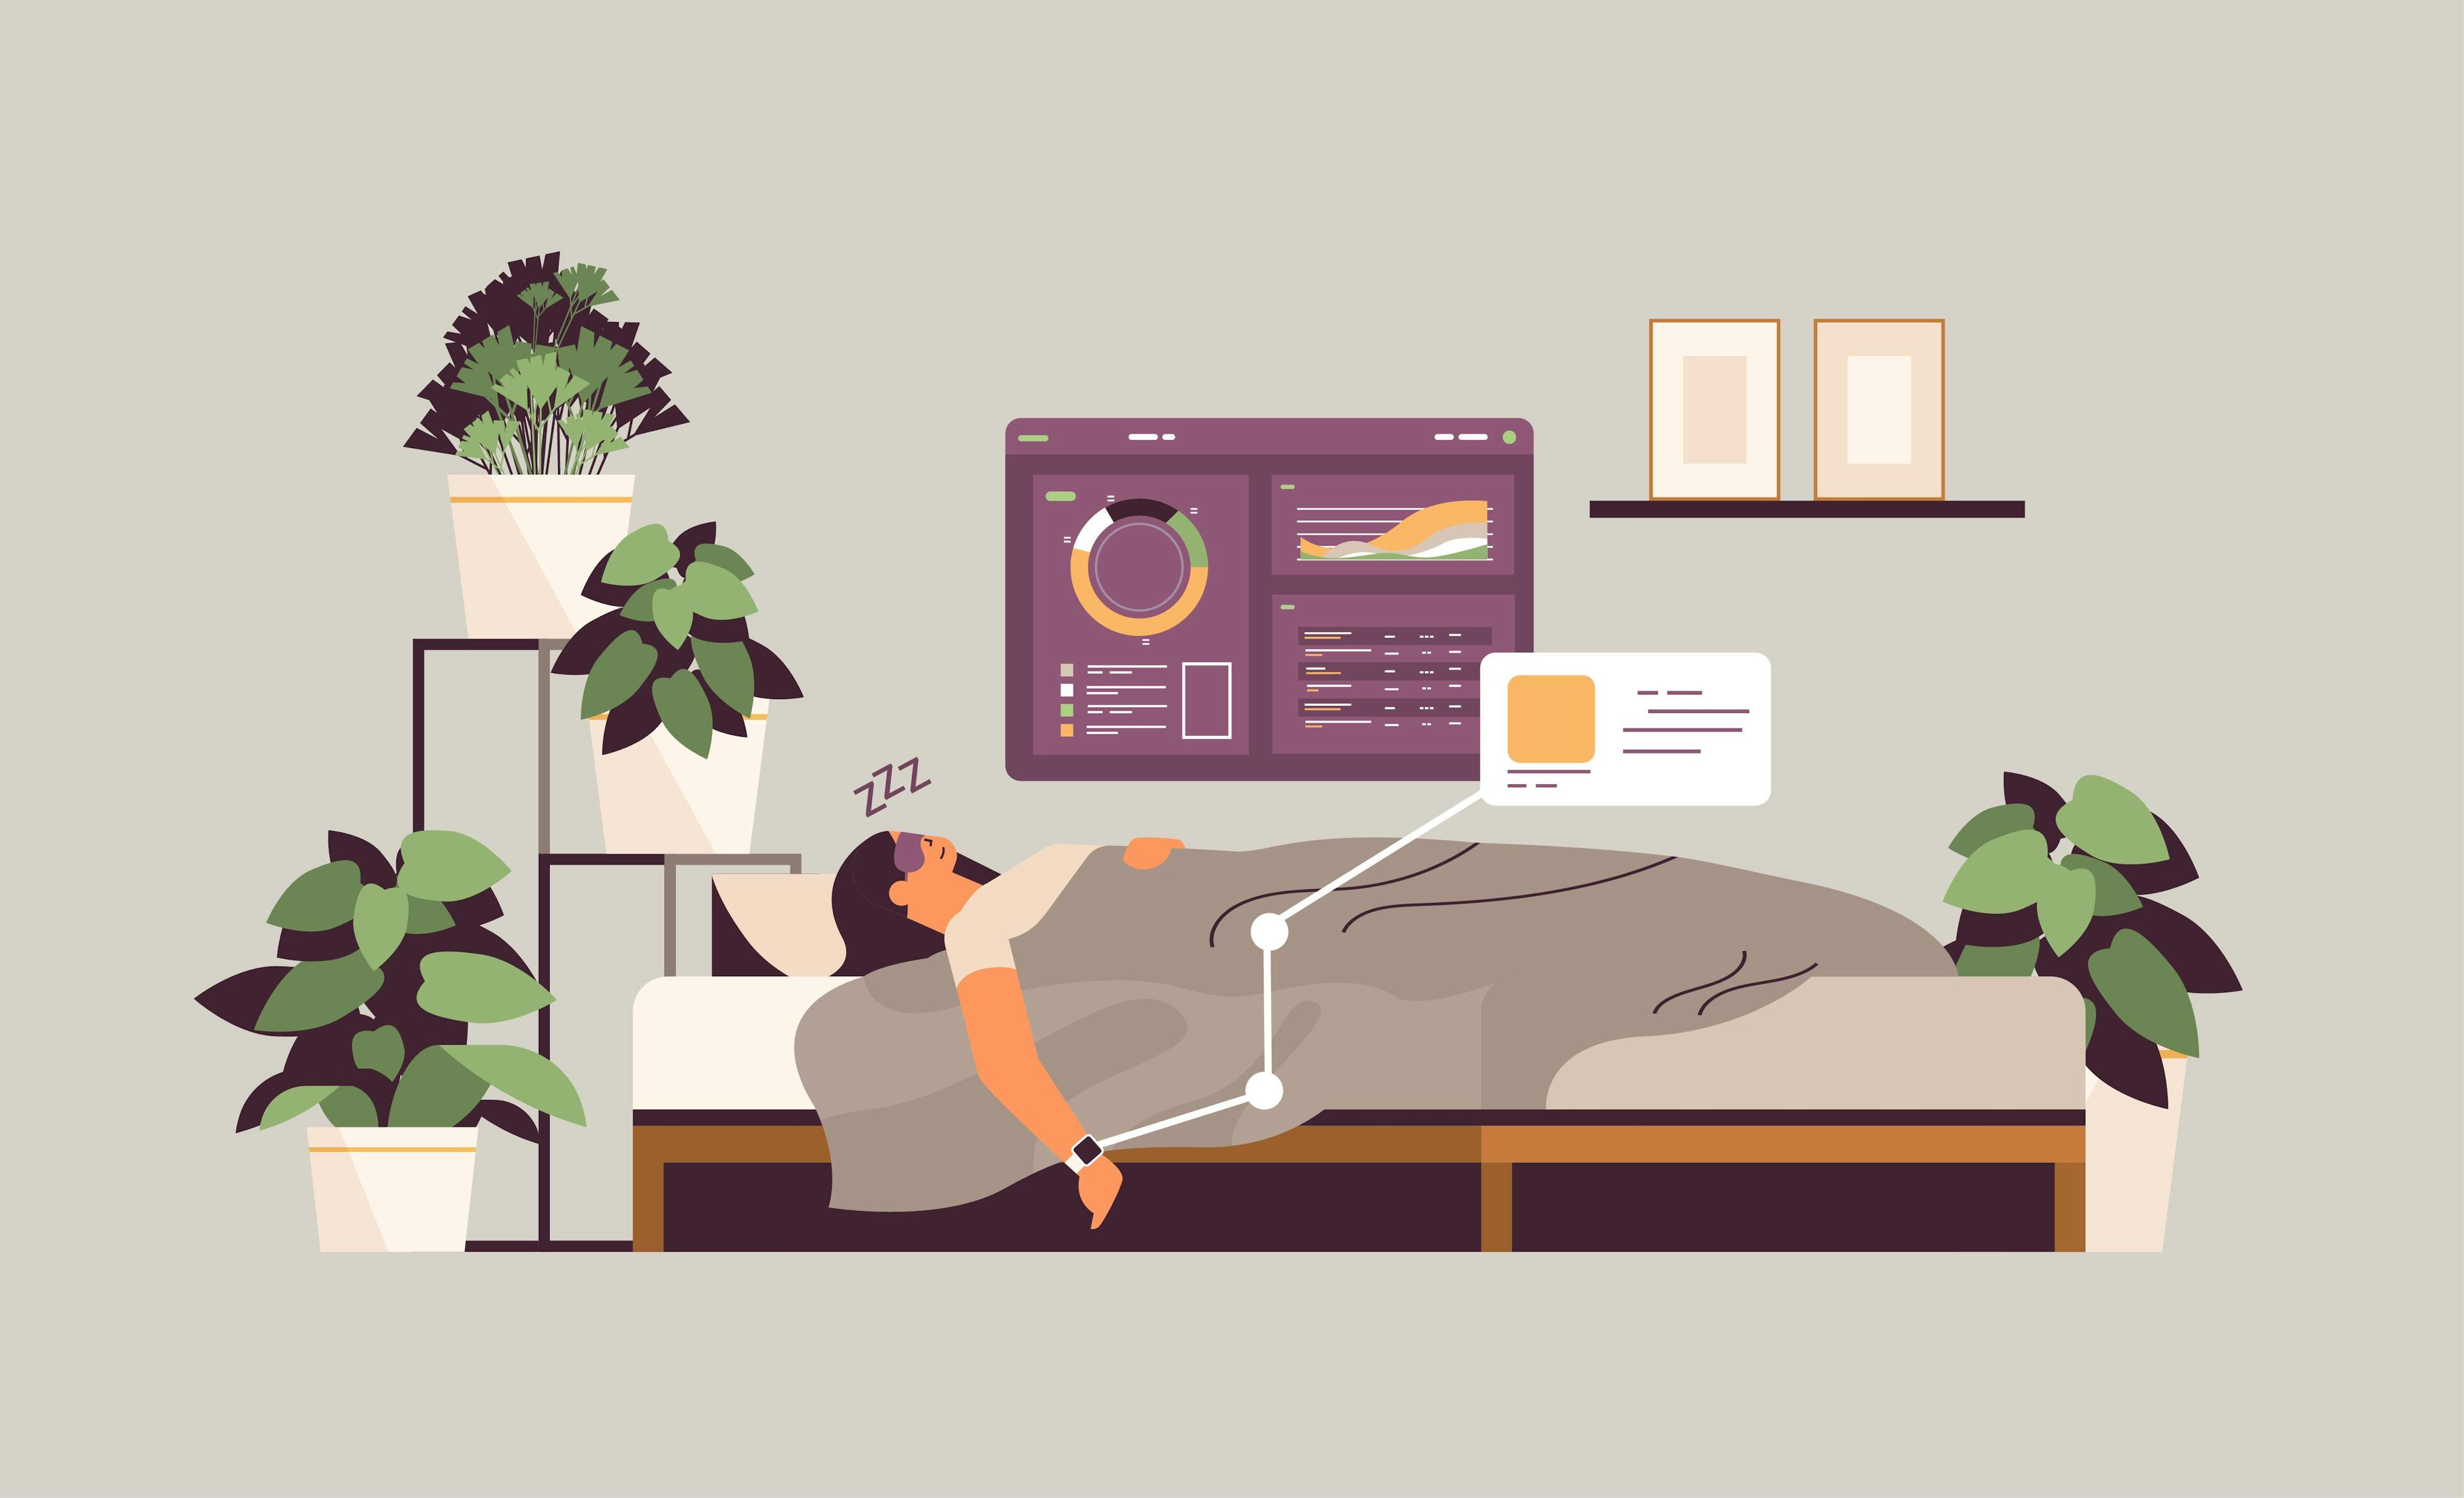 The study included 526 people who were assessed for sleep duration and quality (using wrist activity monitors) and sleep fragmentation, which looks at short interruptions of sleep. Image Credit: © mast3r - stock.adobe.com